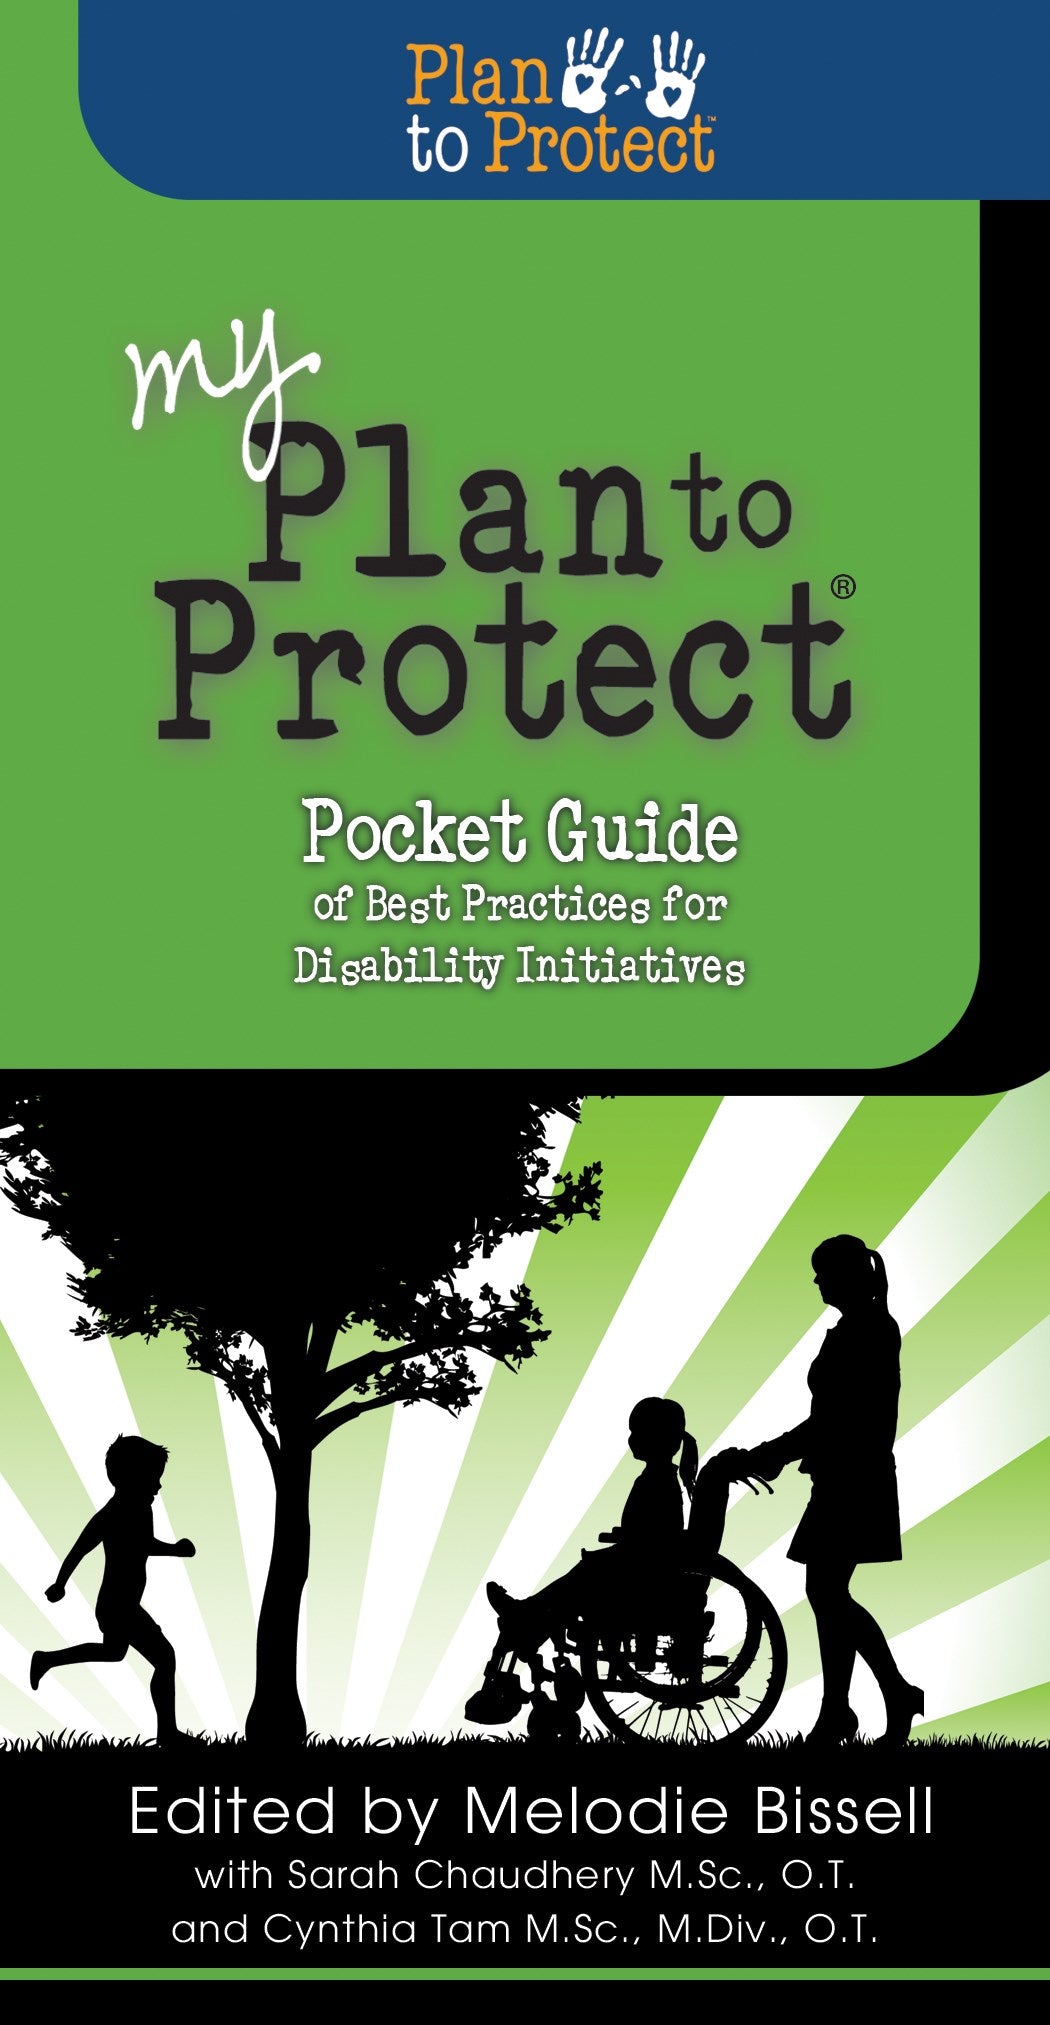 My Plan To Protect Pocket Guide (Disability Initiatives)